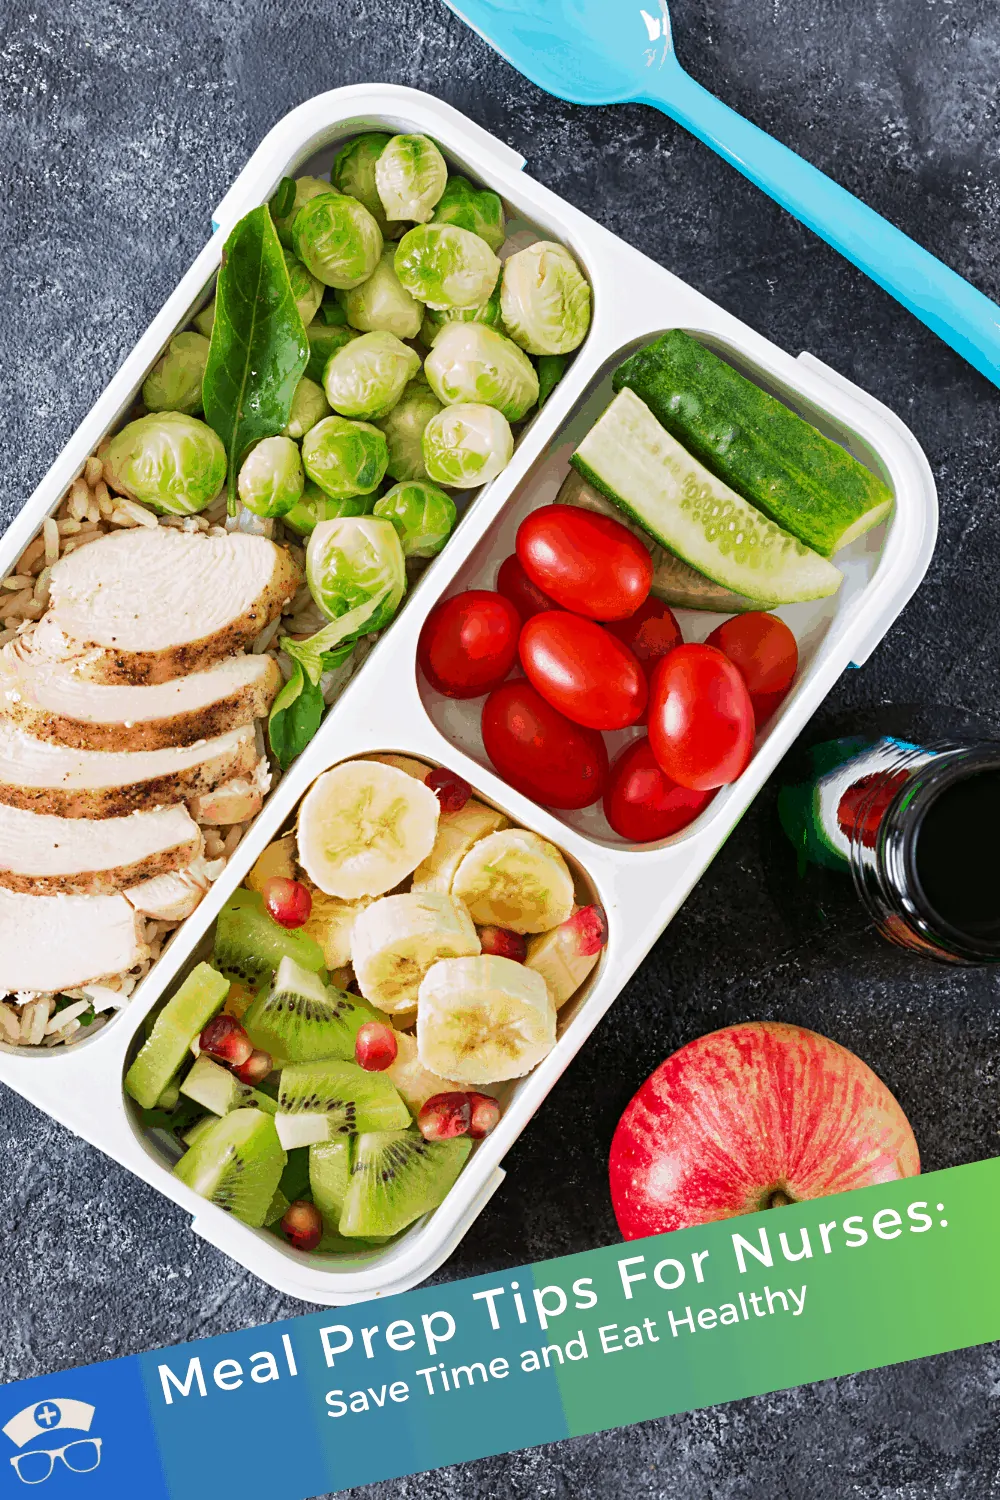 Meal Prep Tips For Nurses: Save Time and Eat Healthy. When you are short on time but still want to eat healthy, meal prep is the answer. These meal prep tips for busy people - like nurses - are amazing! #thenerdynurse #nurse #nurses #mealprep #nursemeals #healthy